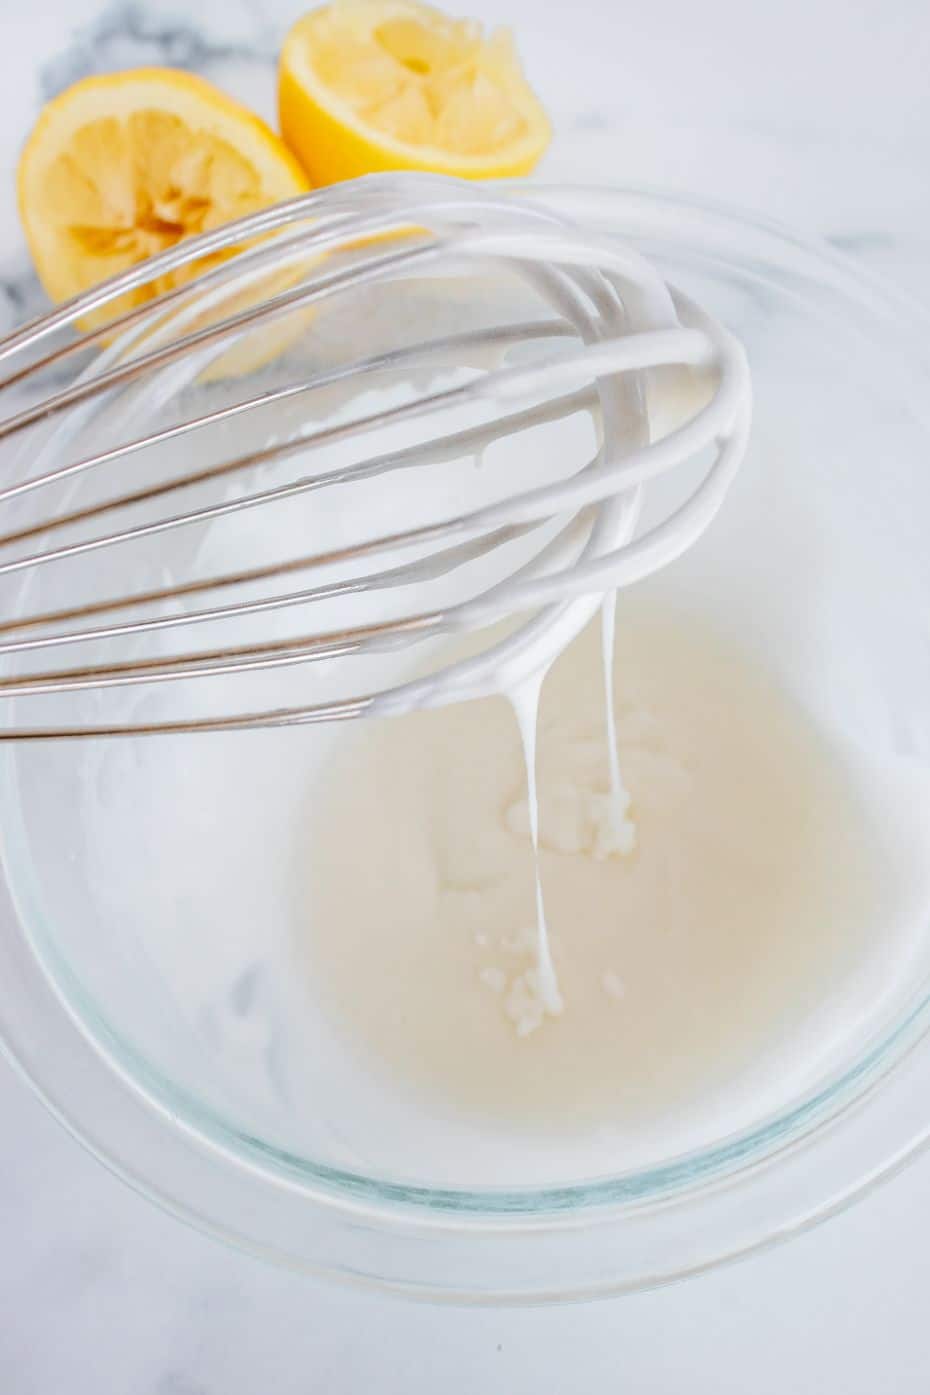 A whisk combing ingredients for a lemon glaze in a glass bowl with some squeezed lemons in the background